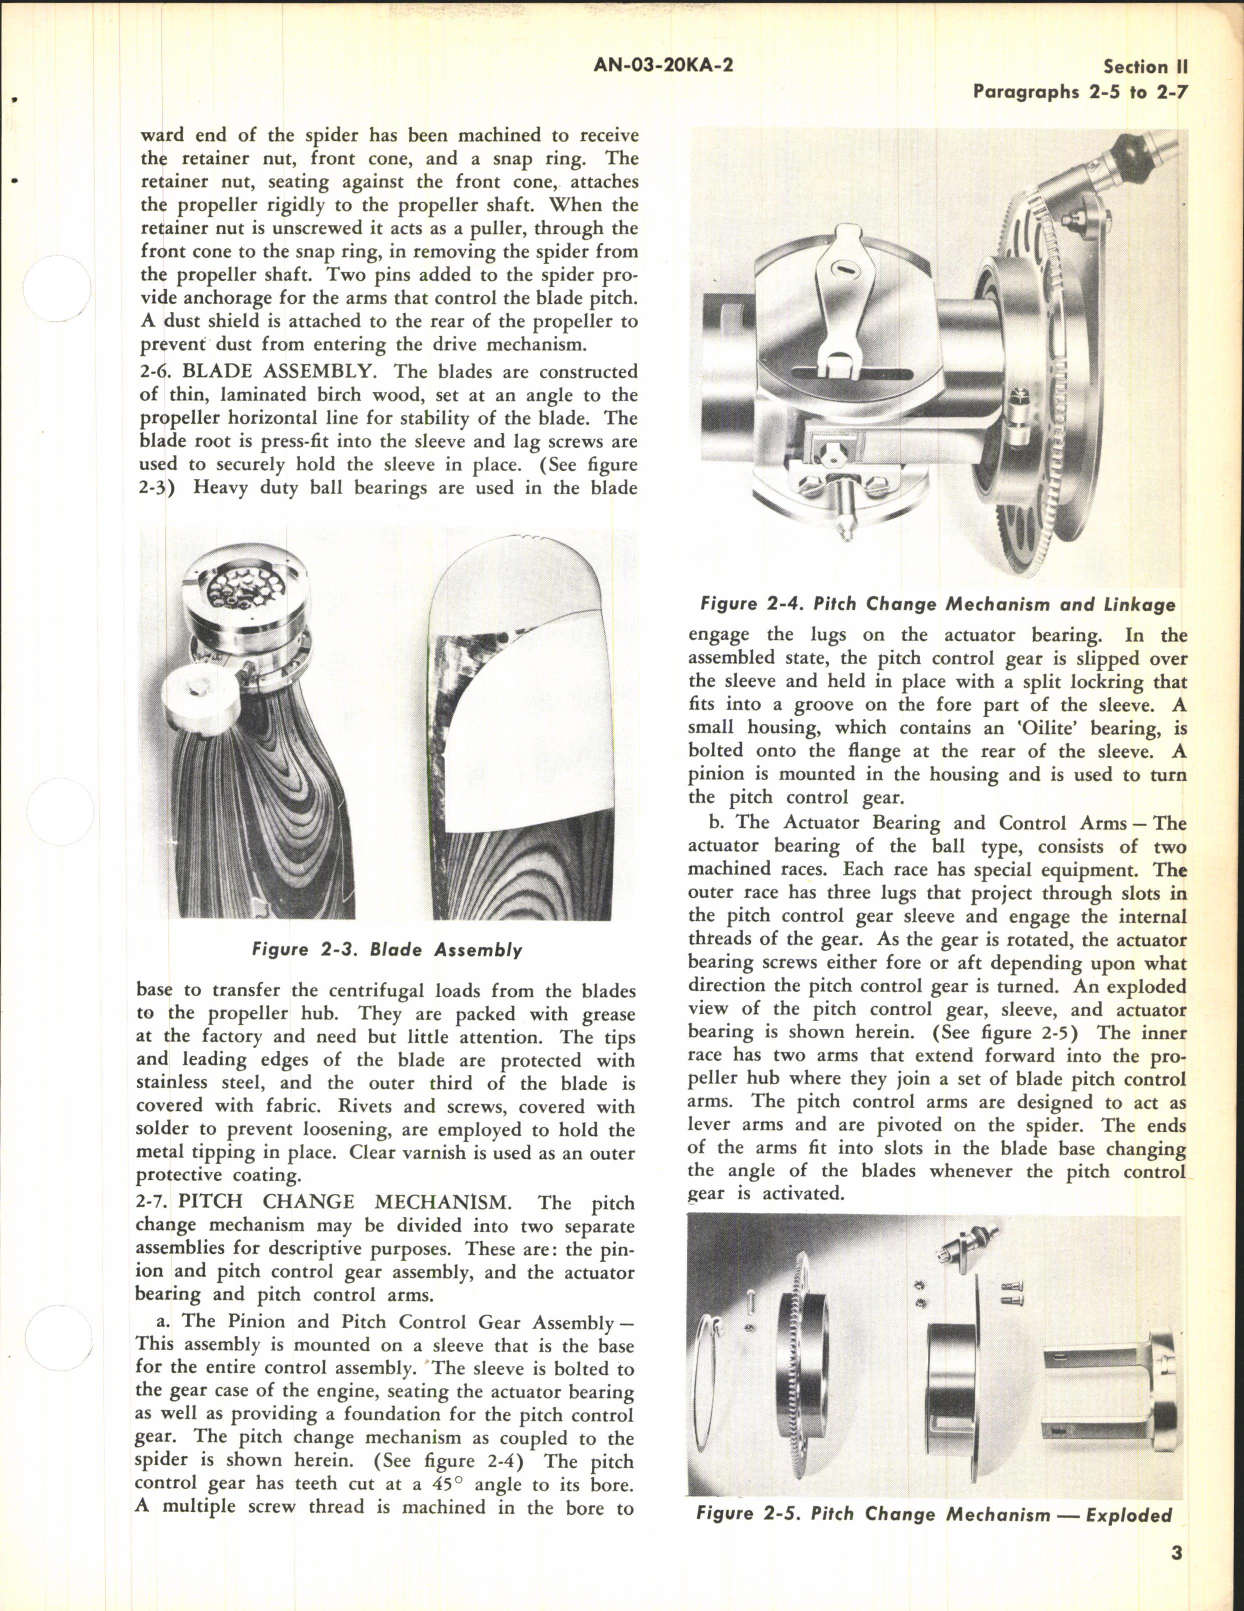 Sample page 7 from AirCorps Library document: Overhaul Instructions for Model R202-101 Manual Control Propeller